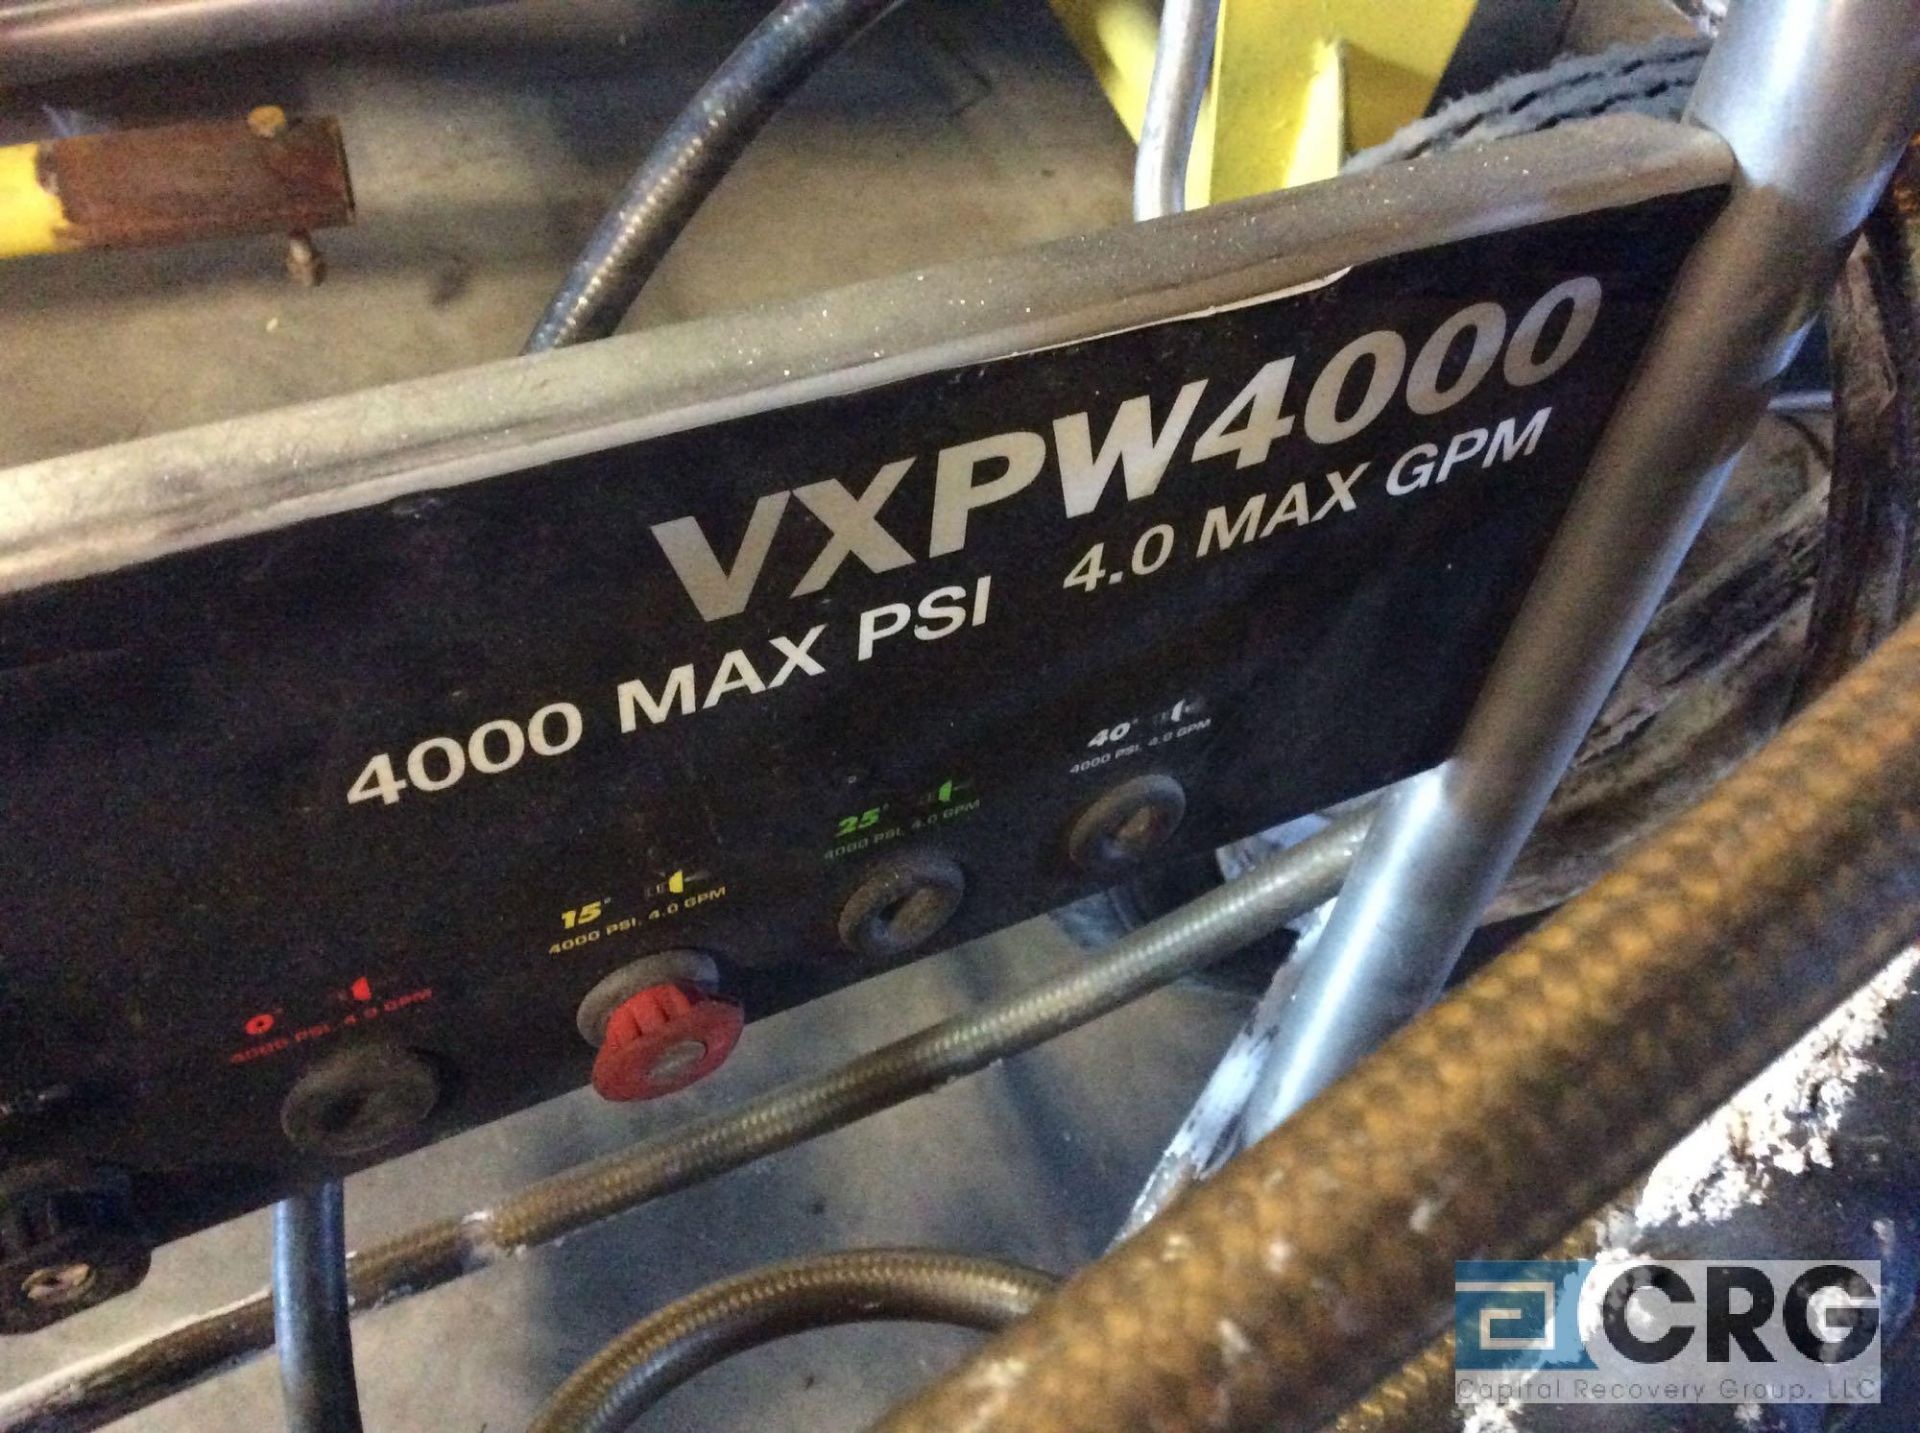 VOX industrial portable pressure washer, mn VXPW4000, 4000 max psi, with Honda GX390 gas engine ( - Image 2 of 2